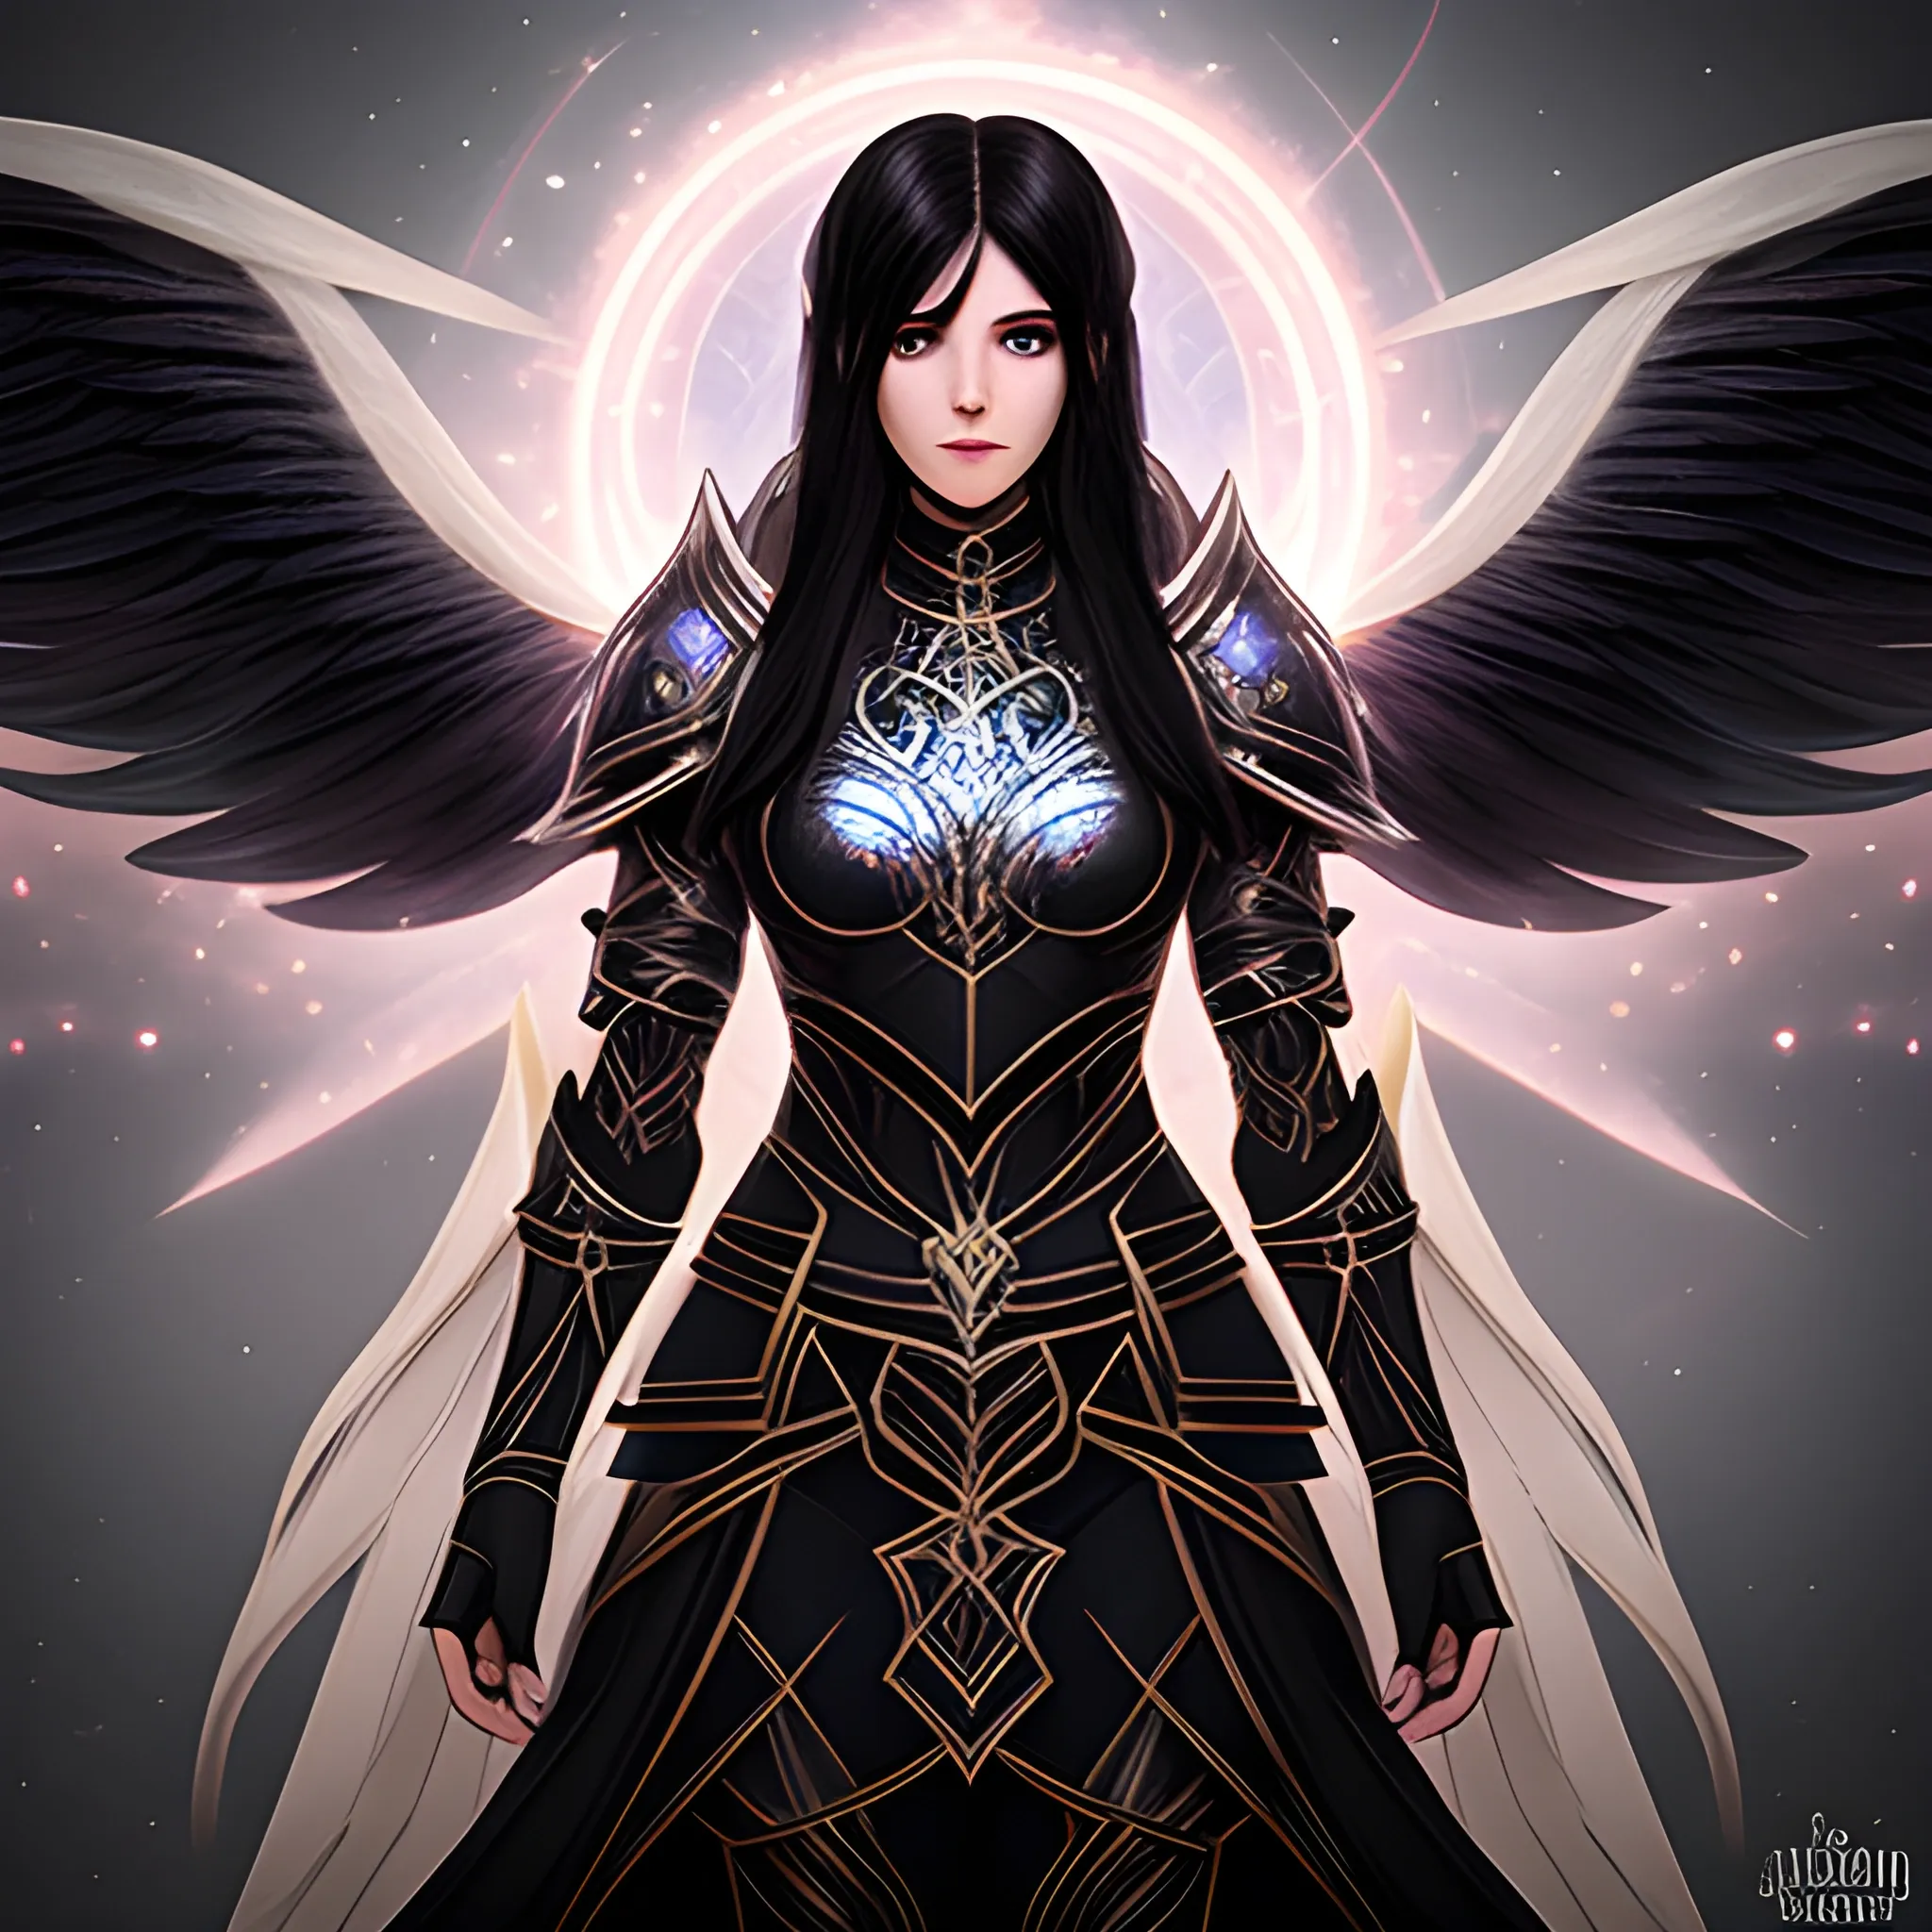 black haired aasimar in light armor
, Trippy